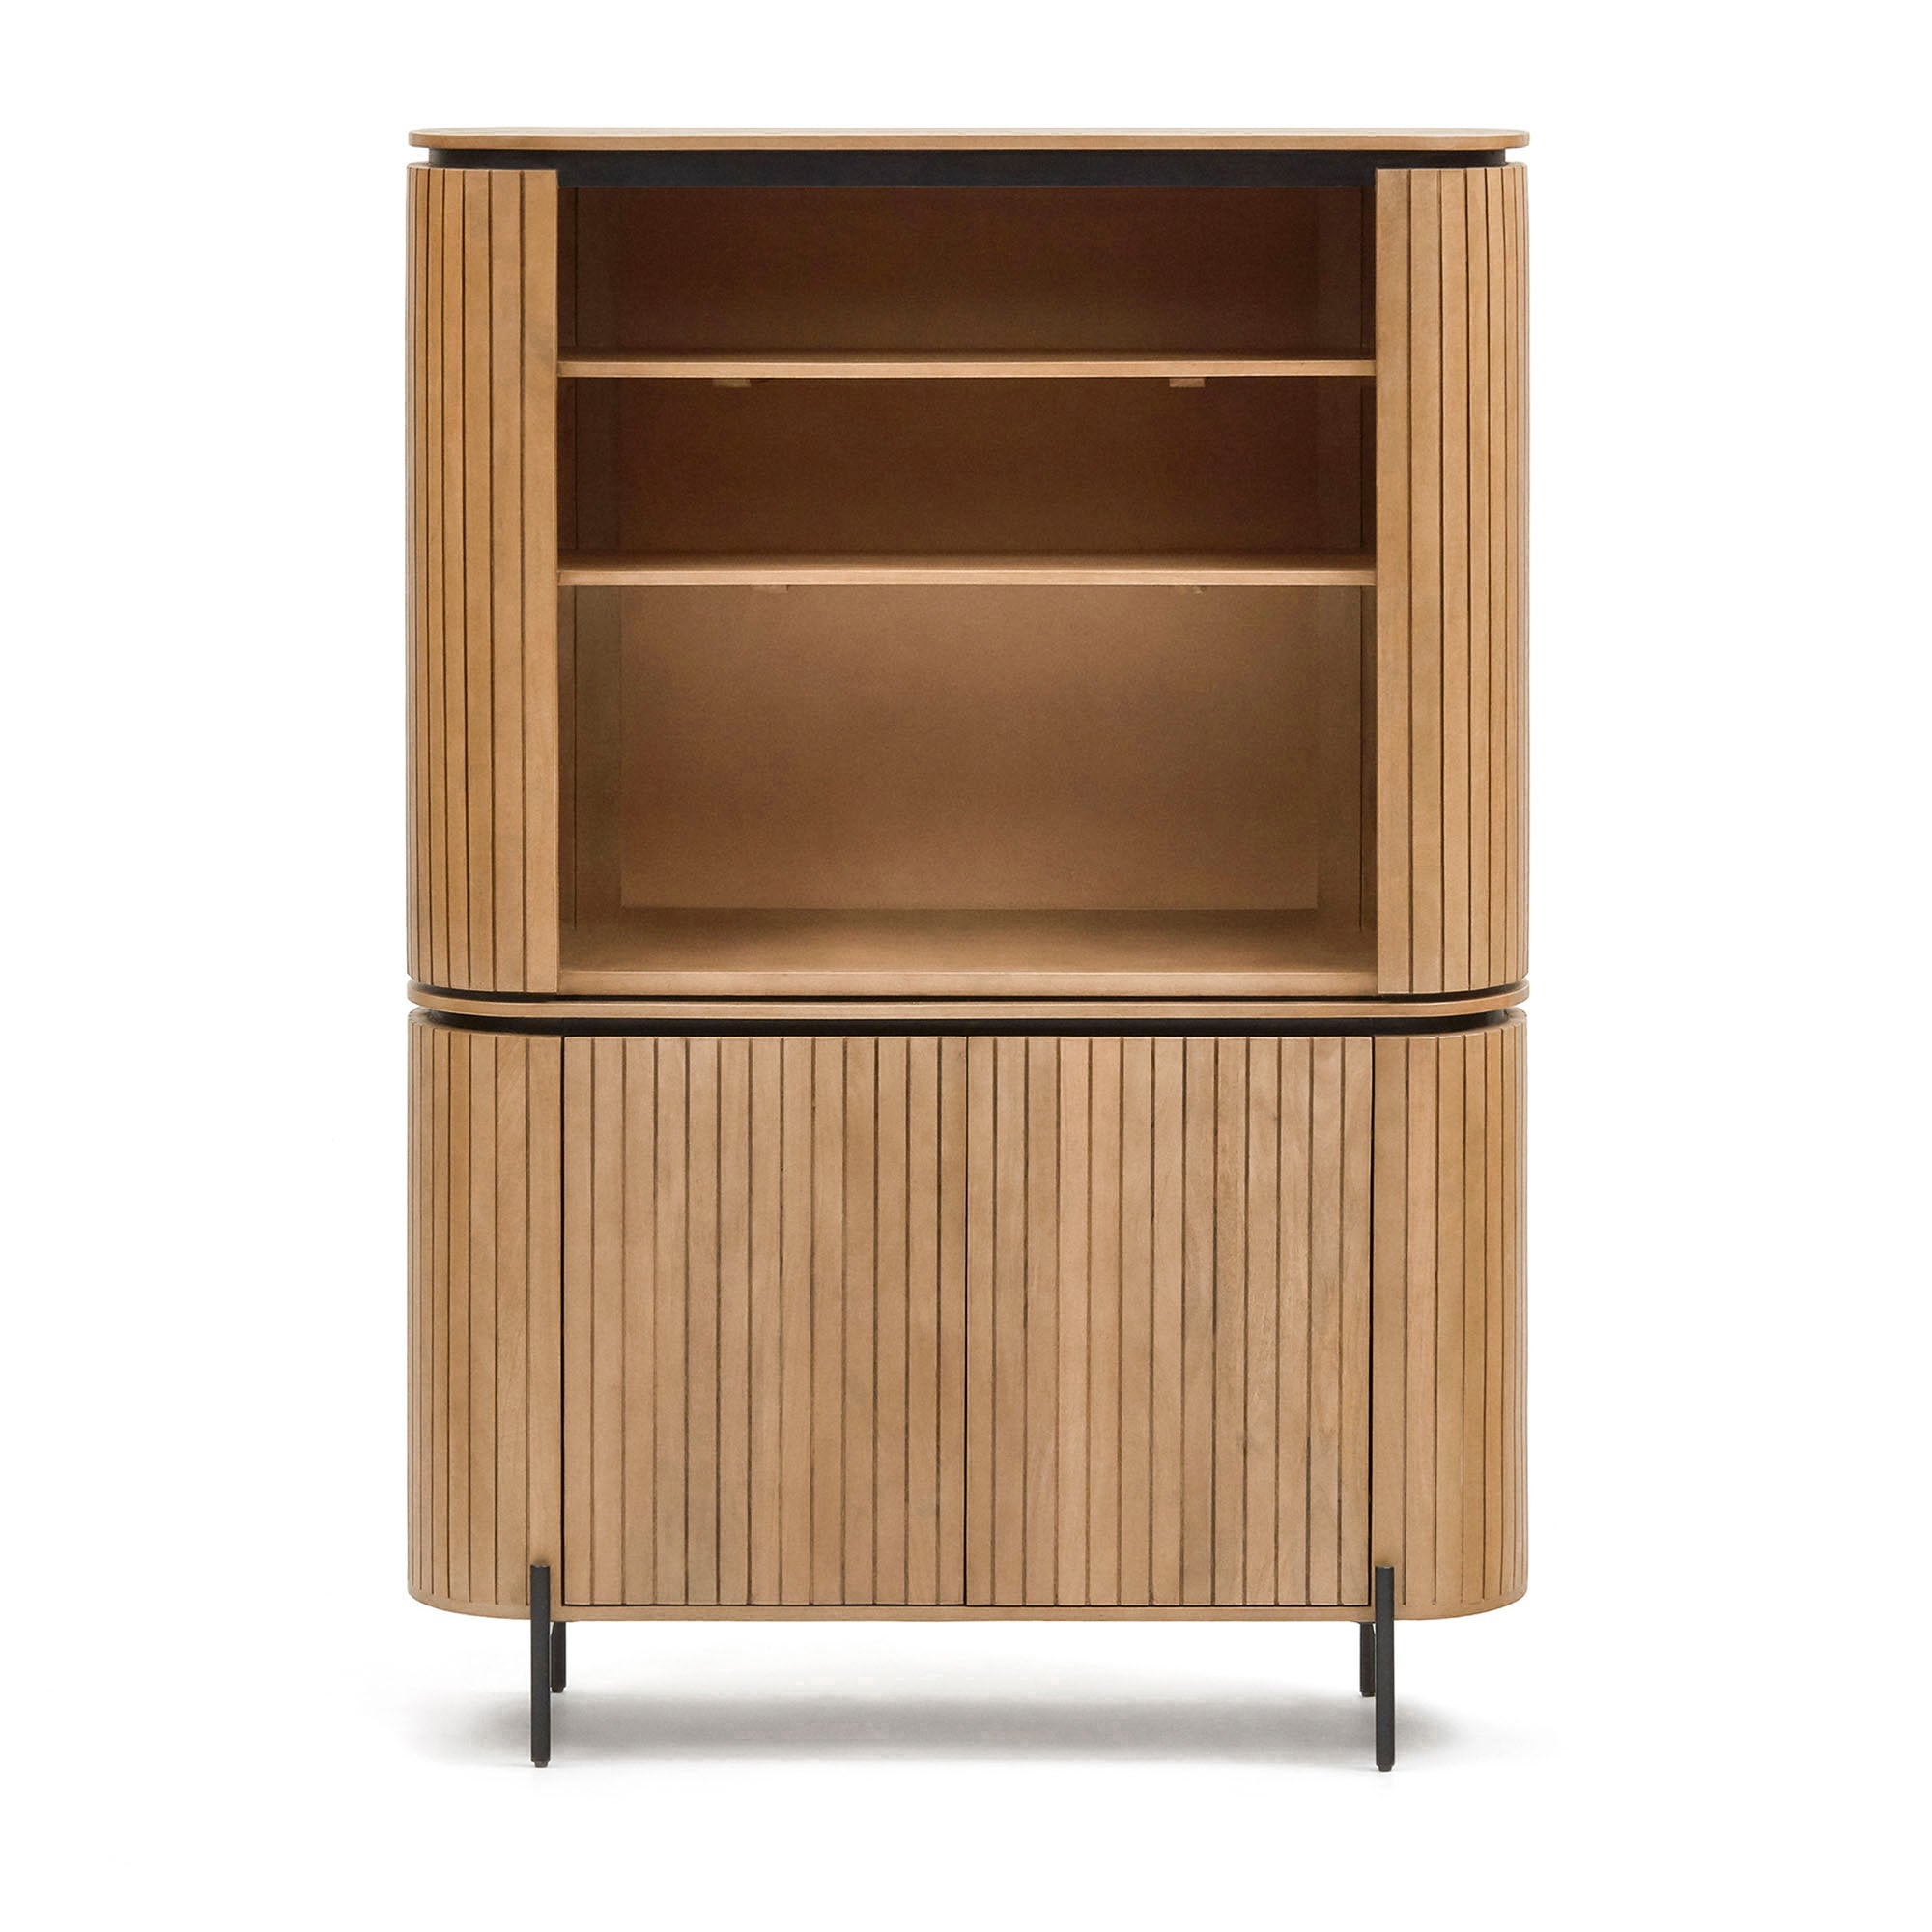 Licia tall 2 door sideboard, made from mango wood with natural finish and metal, 120x170cm